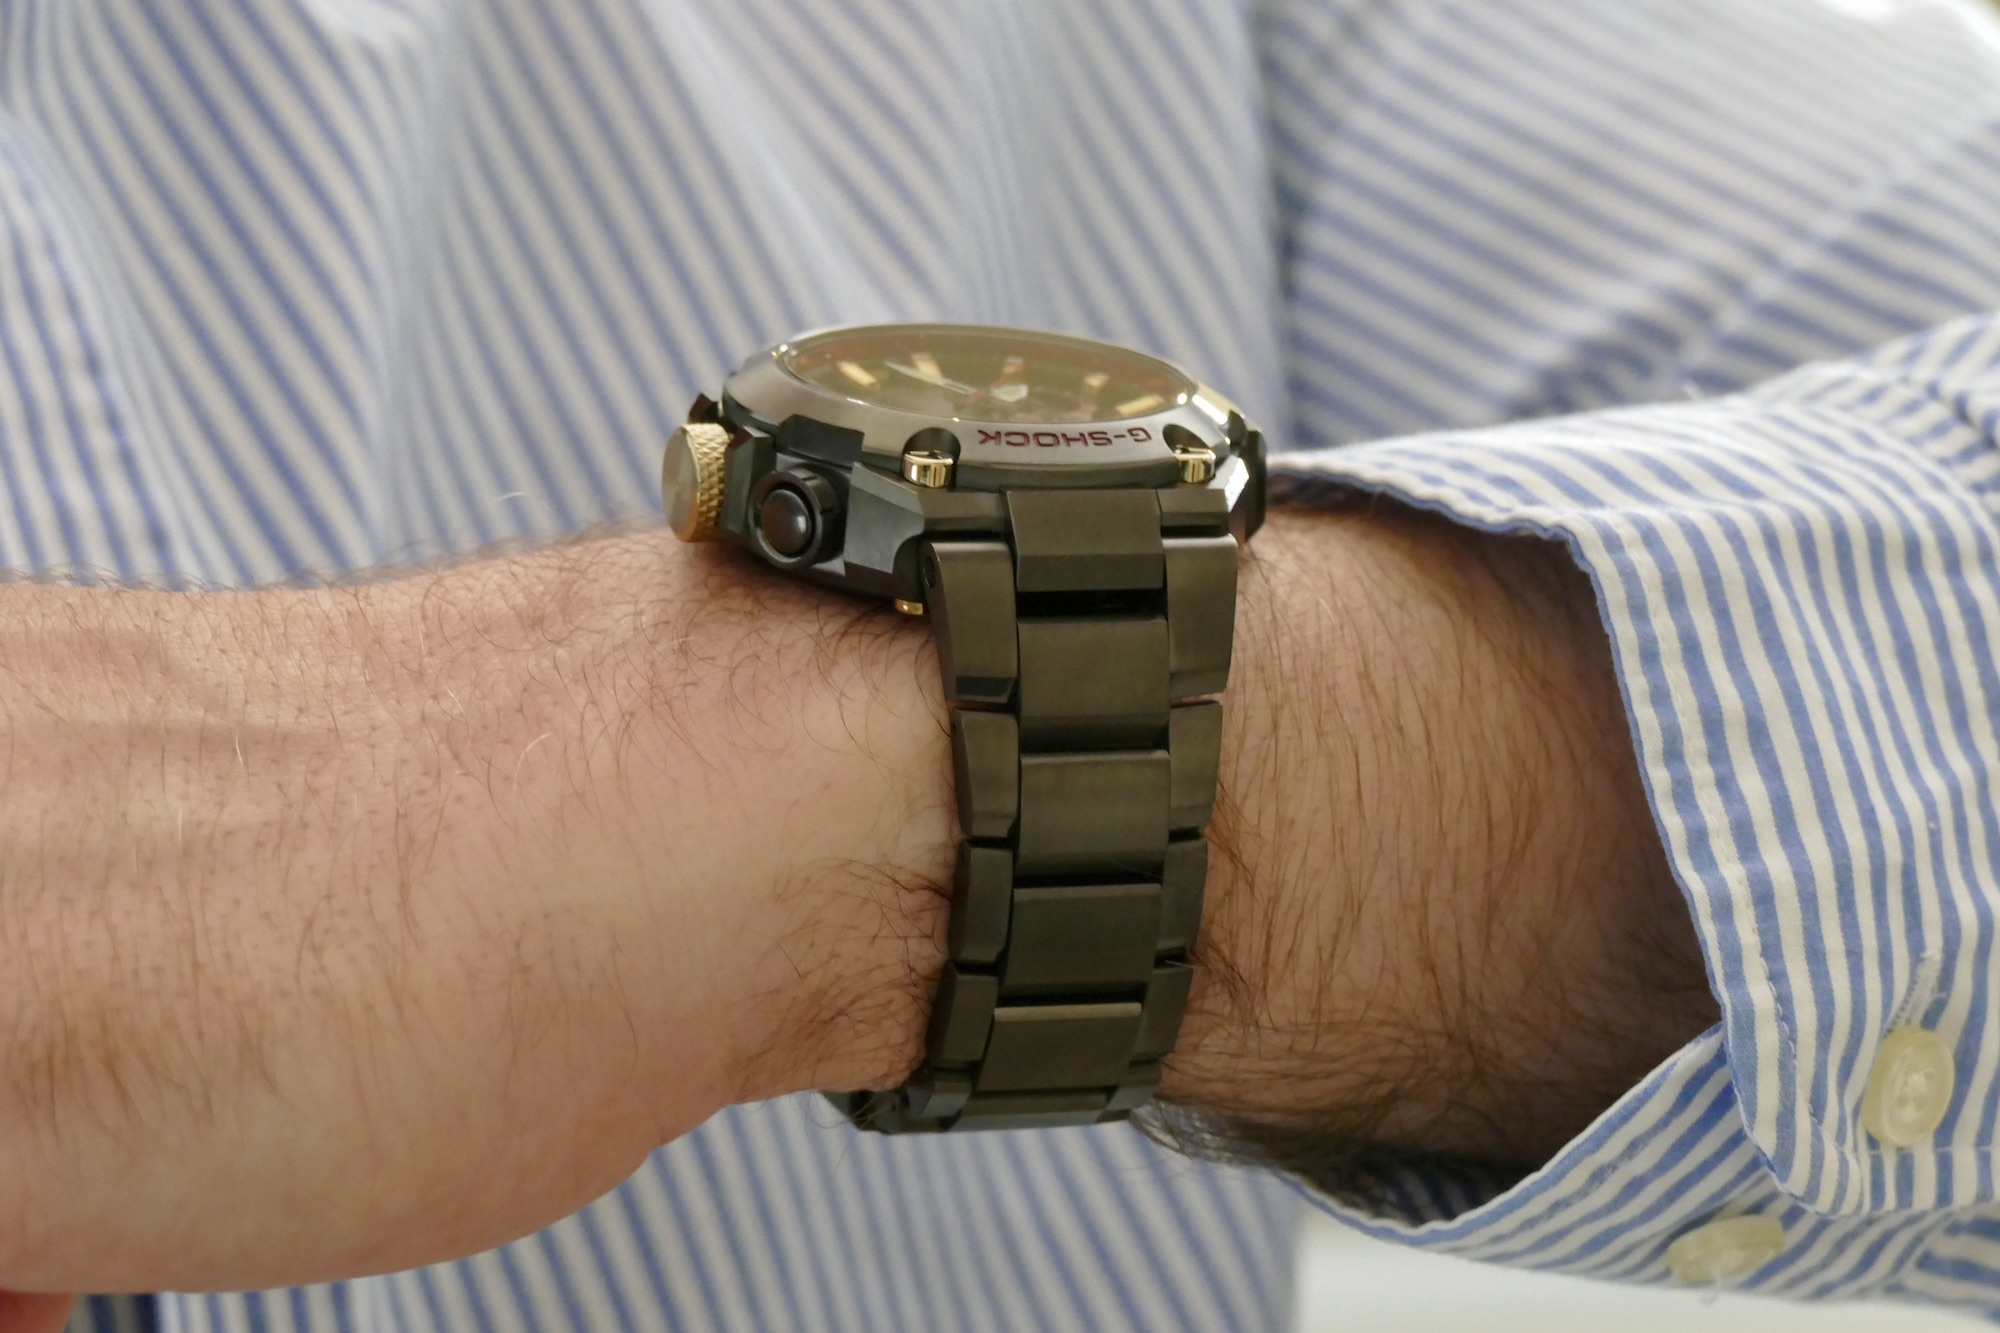 Side view of the G-Shock MRG-B2000B on the wrist.